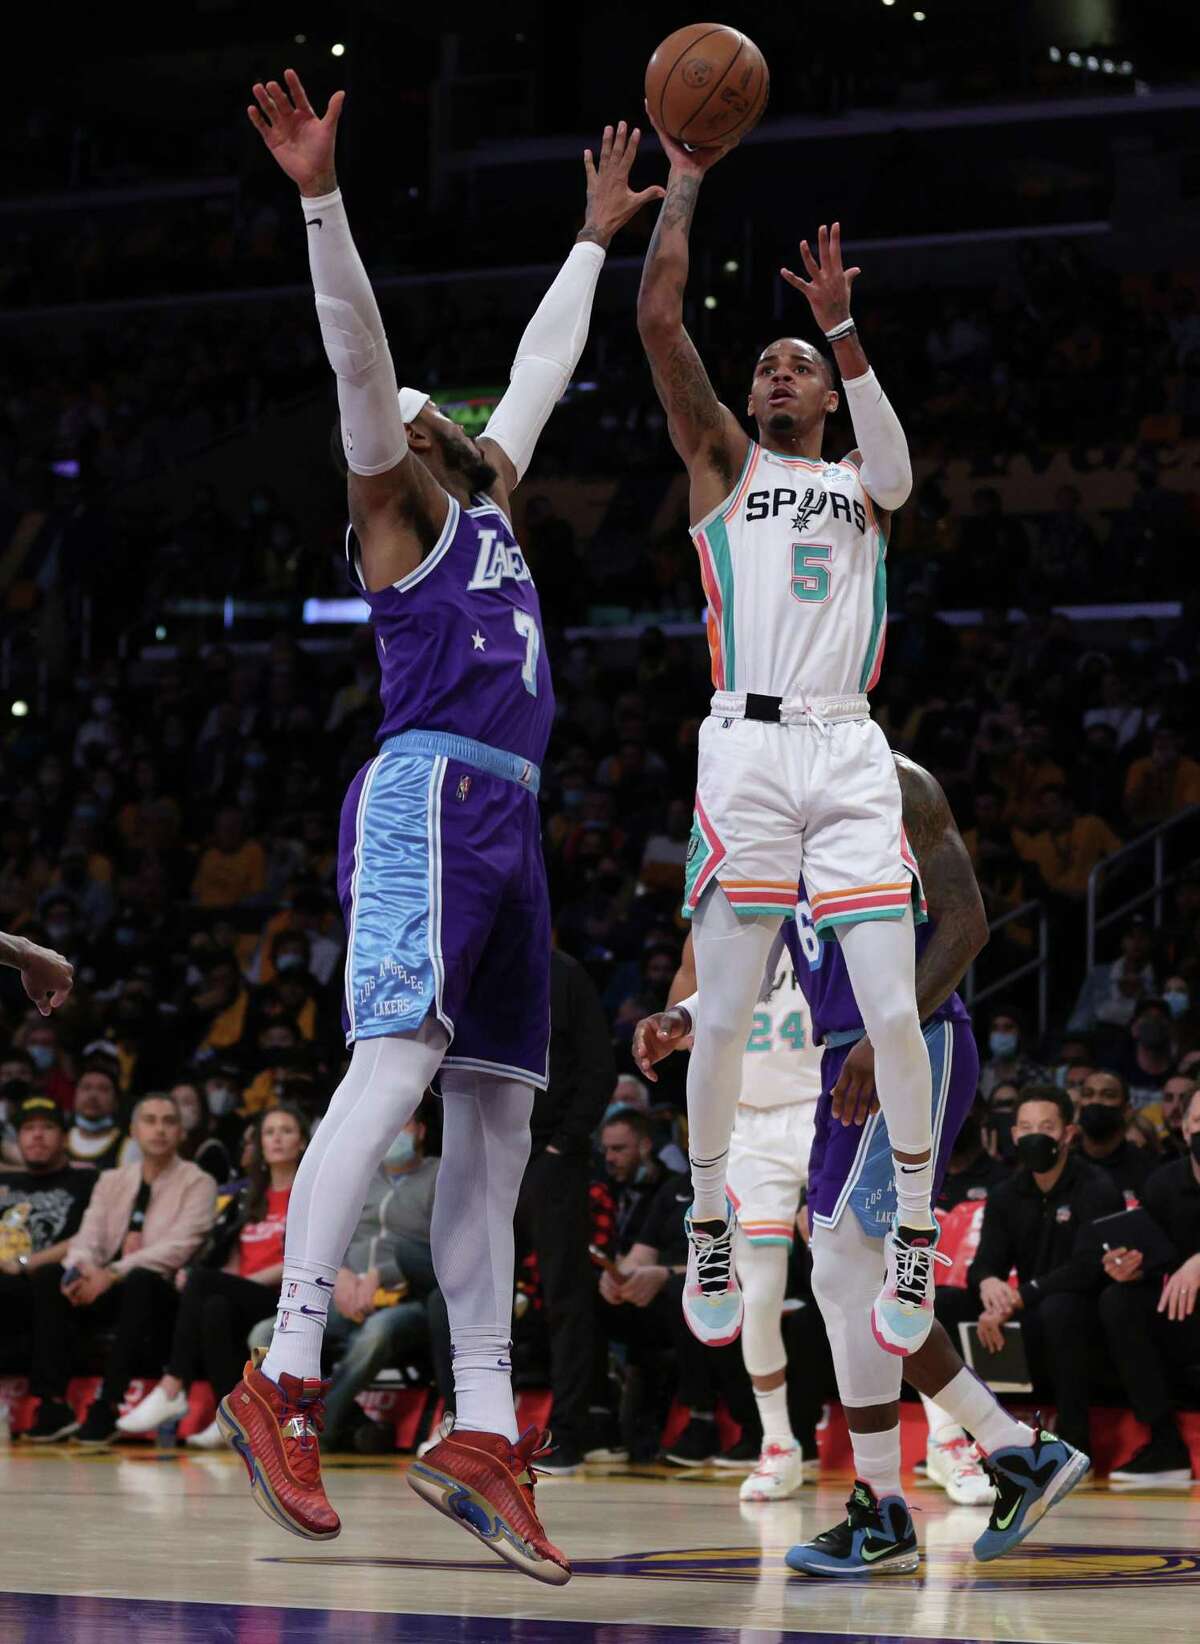 Spurs point guard Dejounte Murray has cleared the NBA’s COVID-19 health and safety protocols and was expected to be available to play in Wednesday night’s road game against the Celtics.